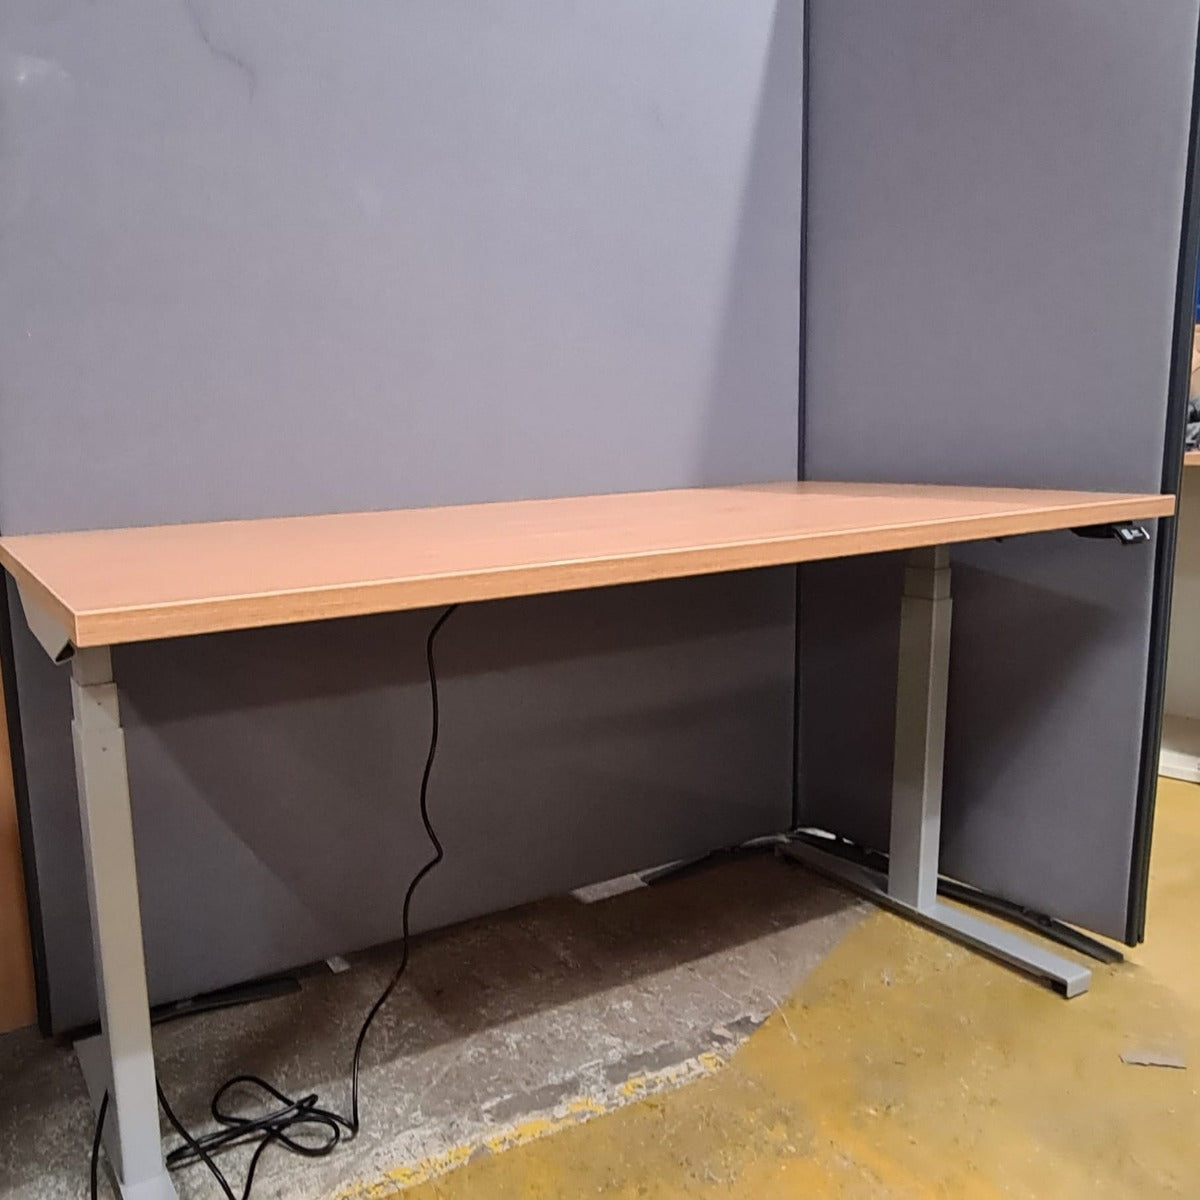 Ex Demo Straight ELECTRIC height adjustable desk - silver metal frame, VARIOUS SIZE TOPS 1200 TO 1600L